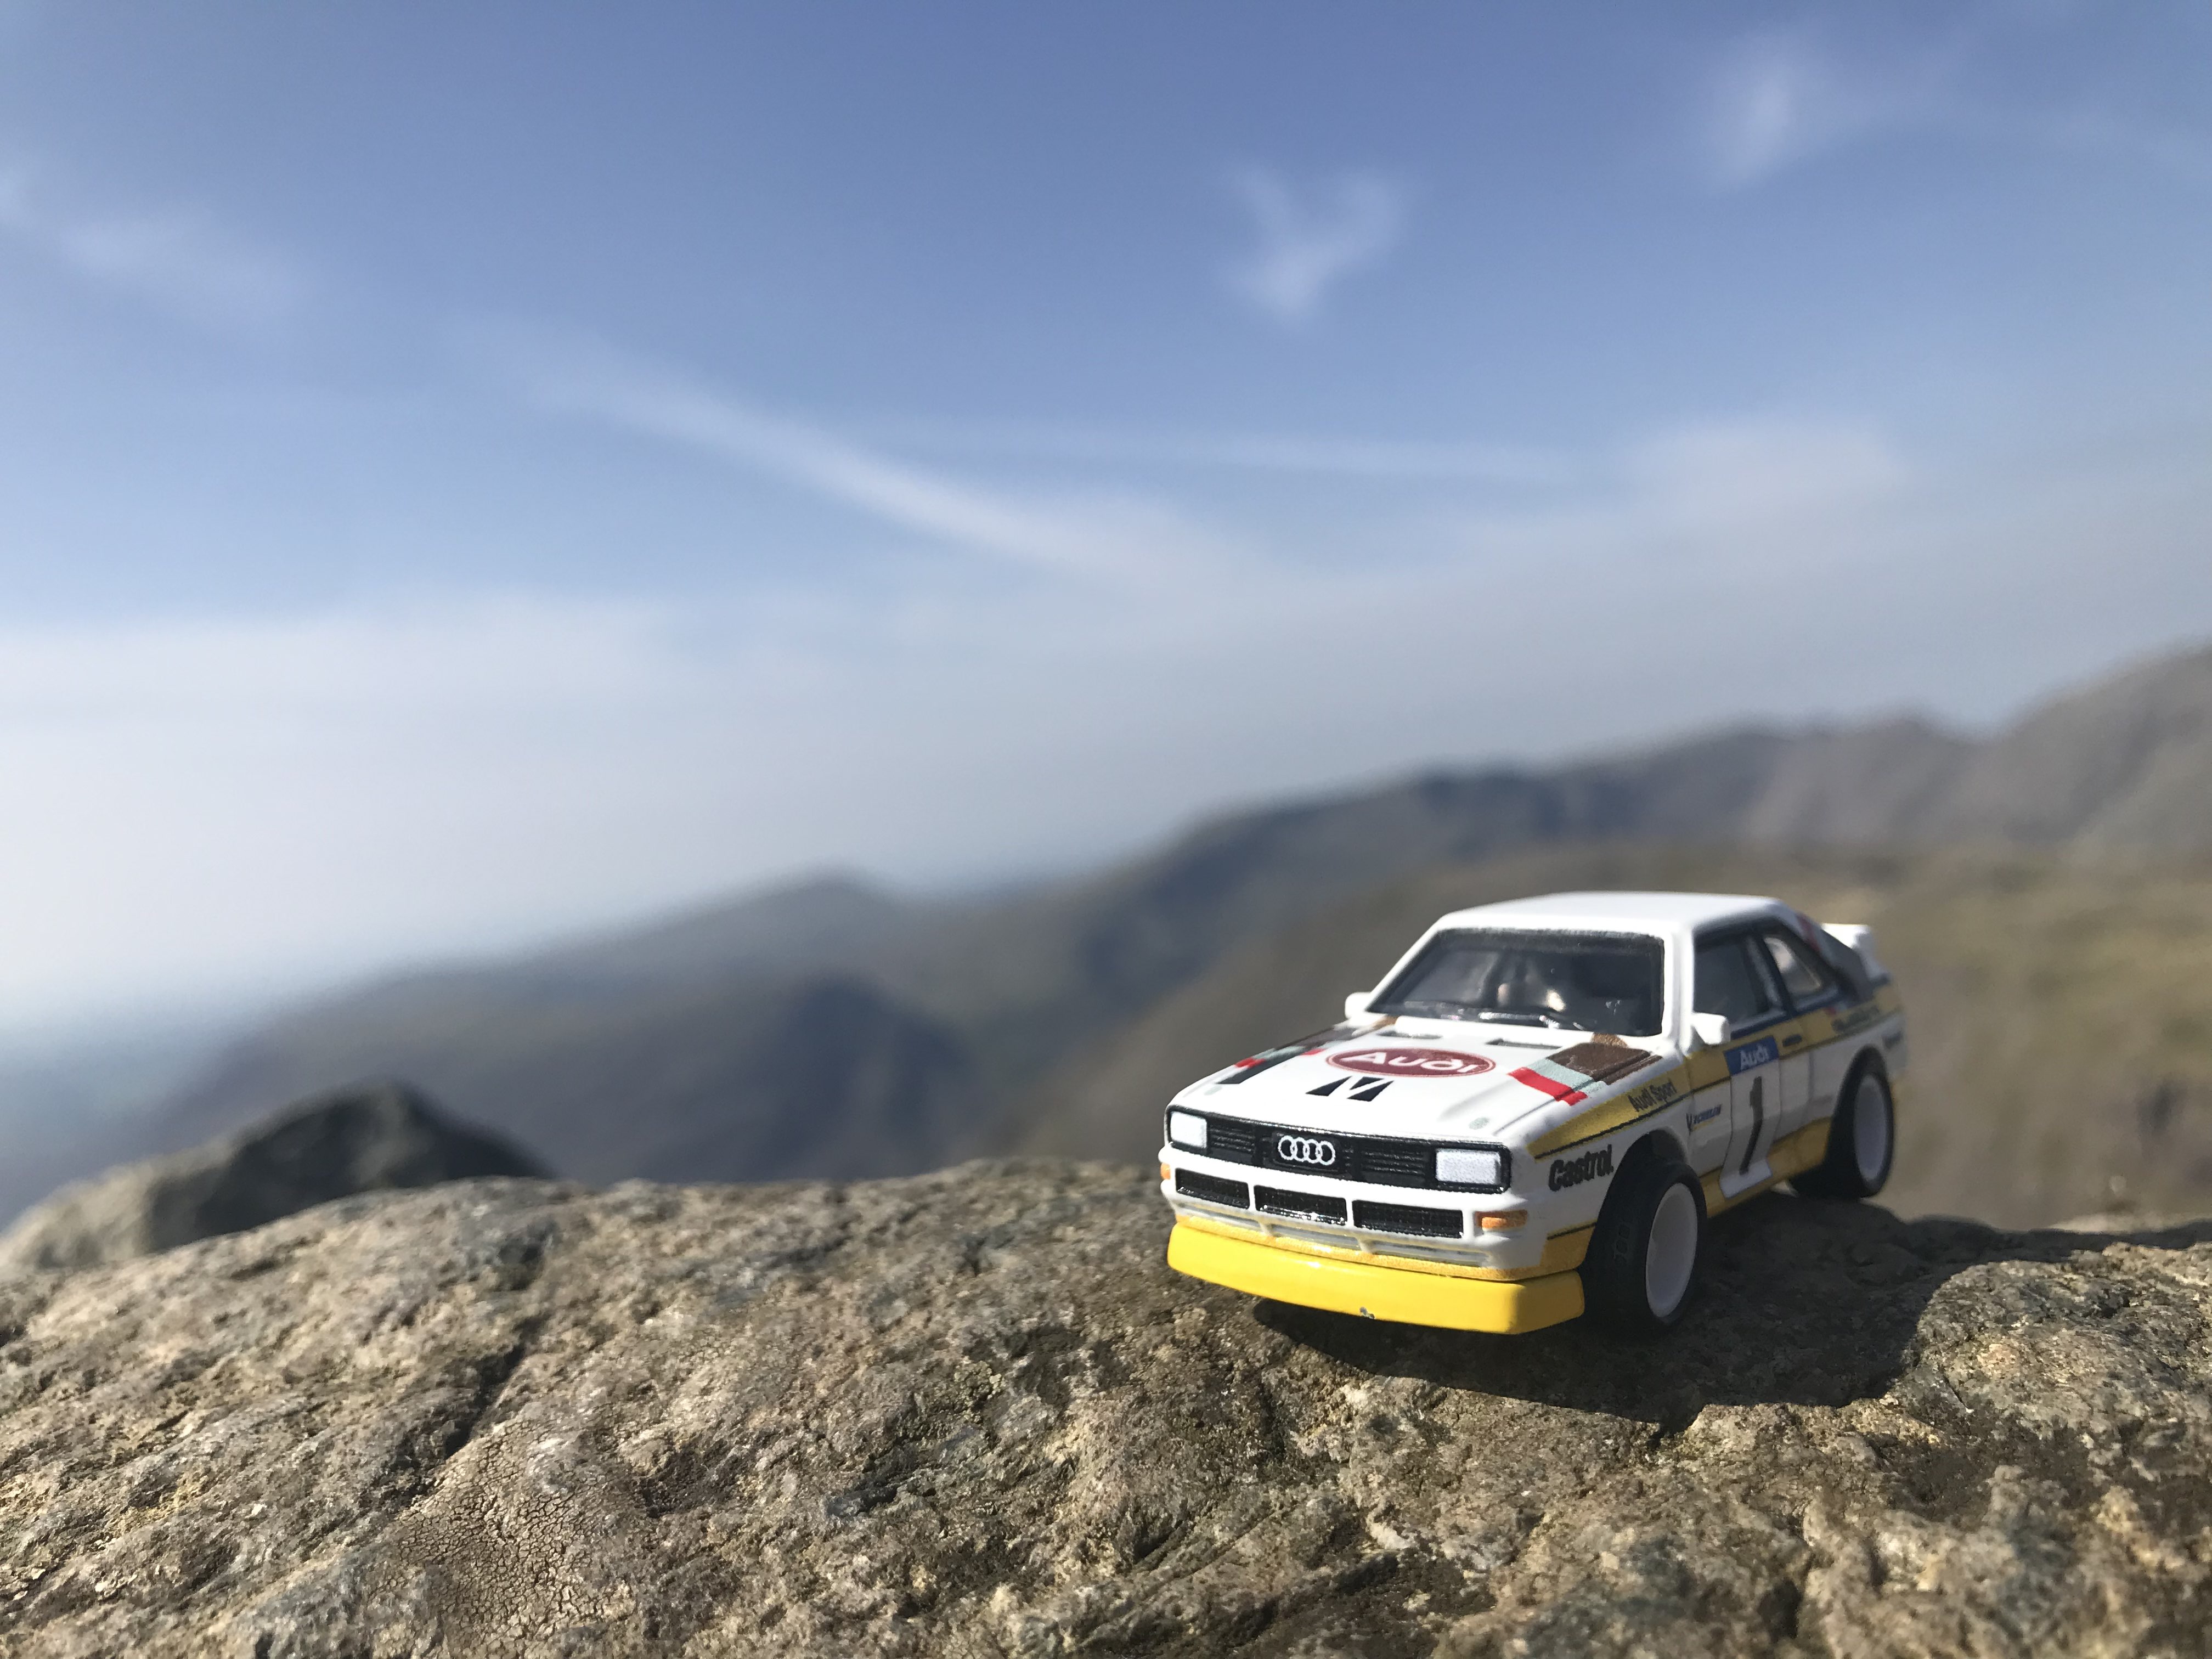 Hotwheels Grp B Rally Audi Quattro on a rock ontop of a hill. Rocky hills are seen in the background [Windows XP Install Theme / Stan Lepard - Velkommen (SM64 Soundfont)]